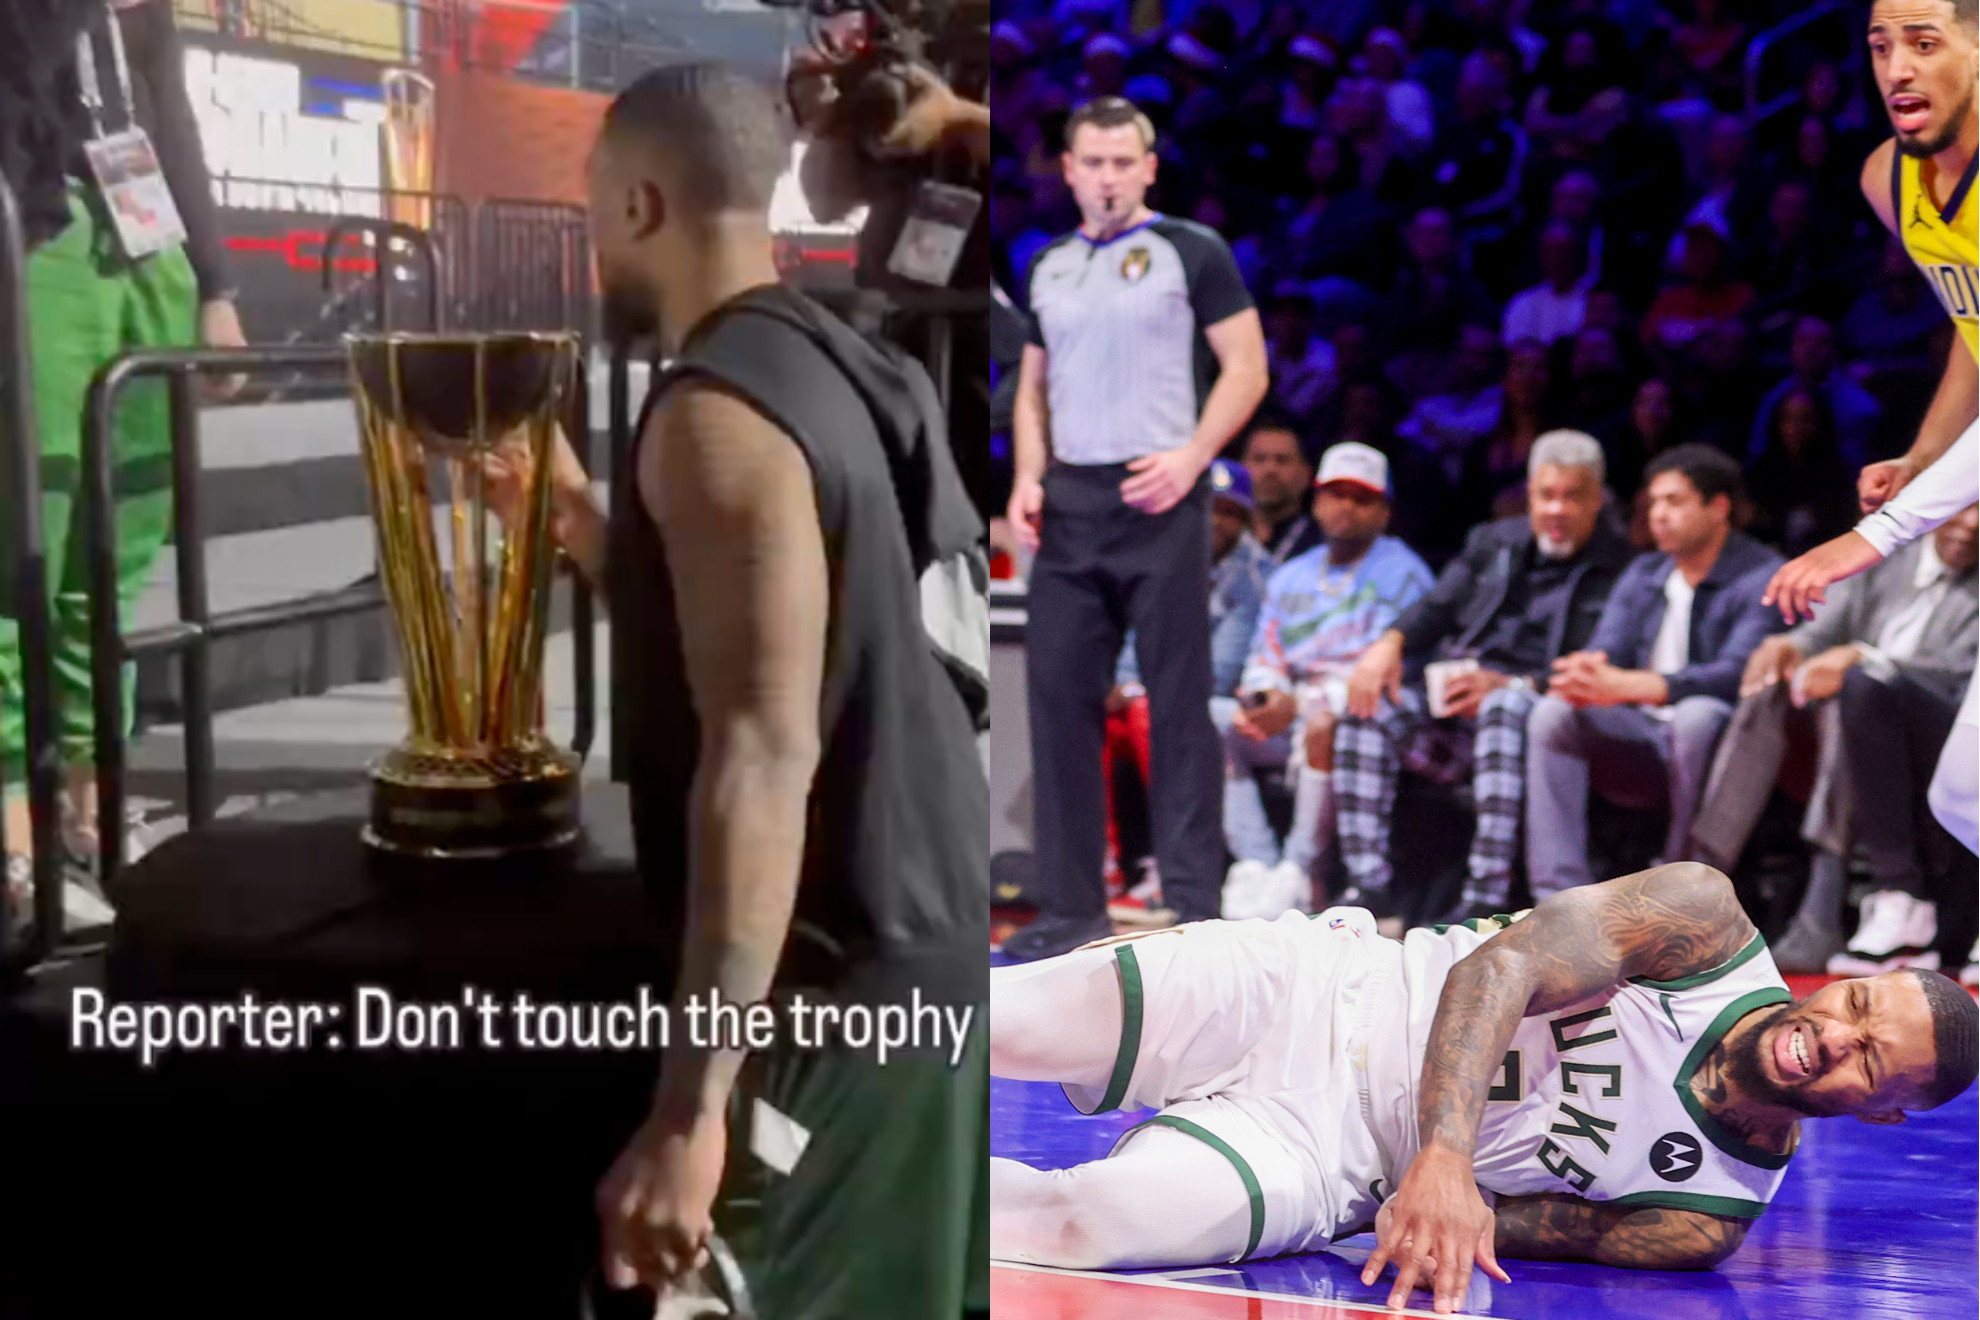 Lillard (left) touched the trophy -- and he later paid the price.